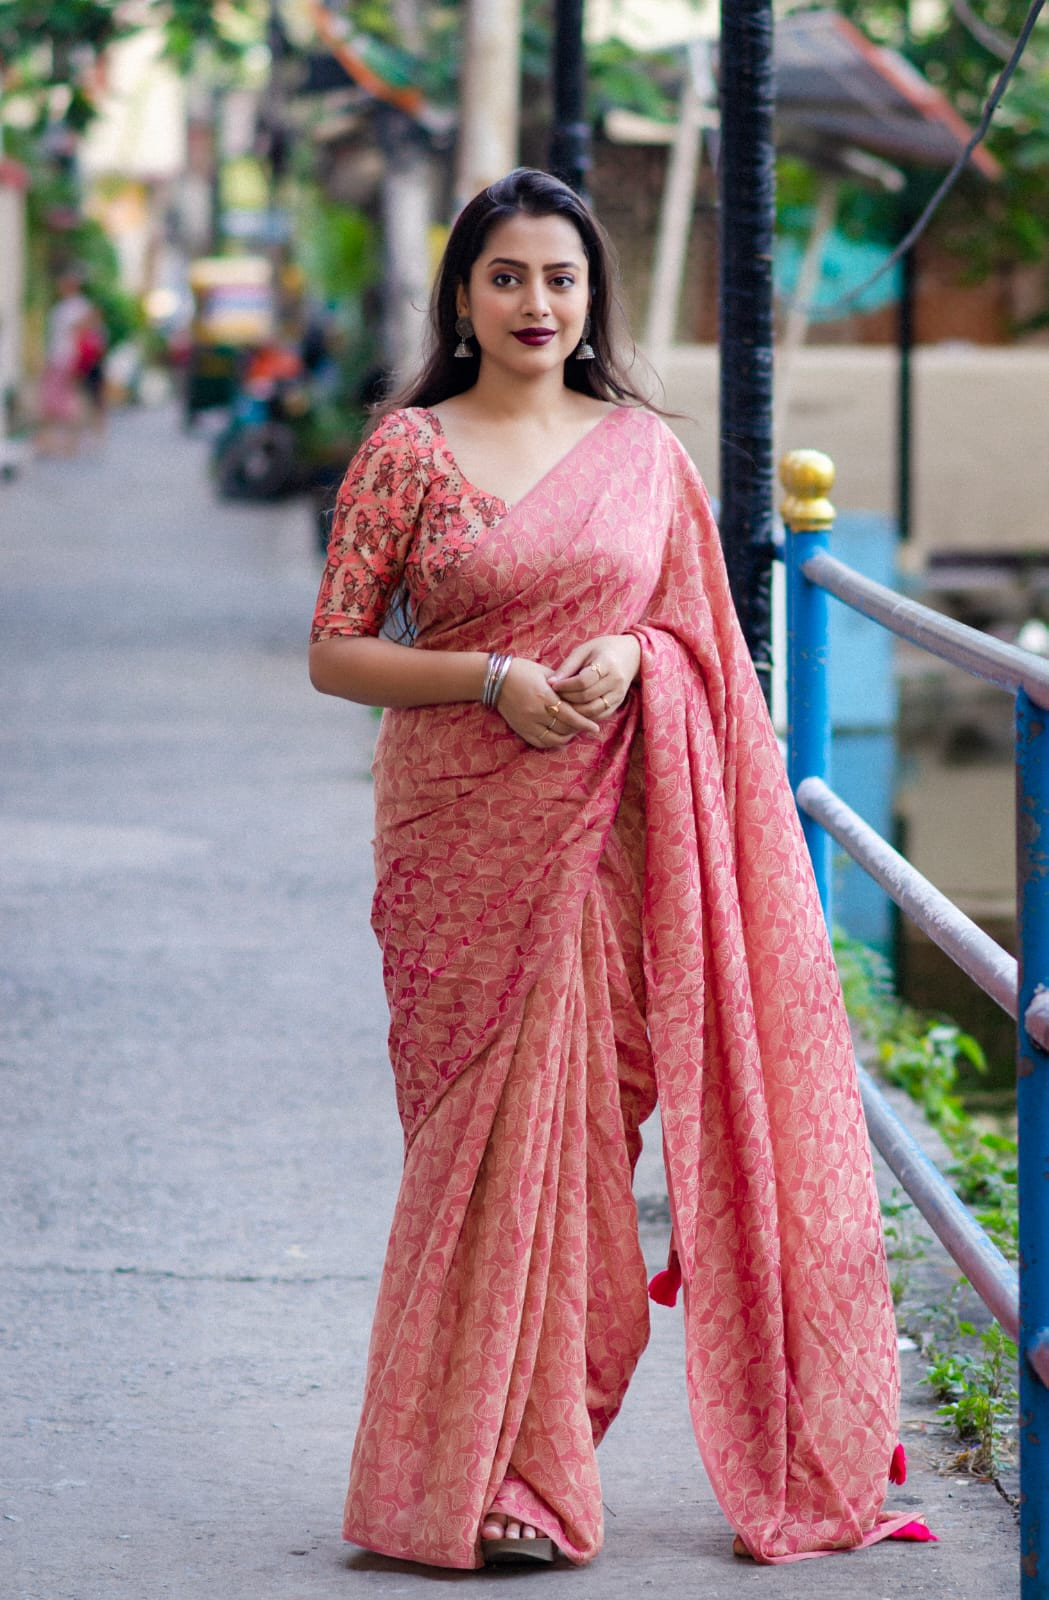 Two tone Soft Cotton silk woven saree - Dusty Pink